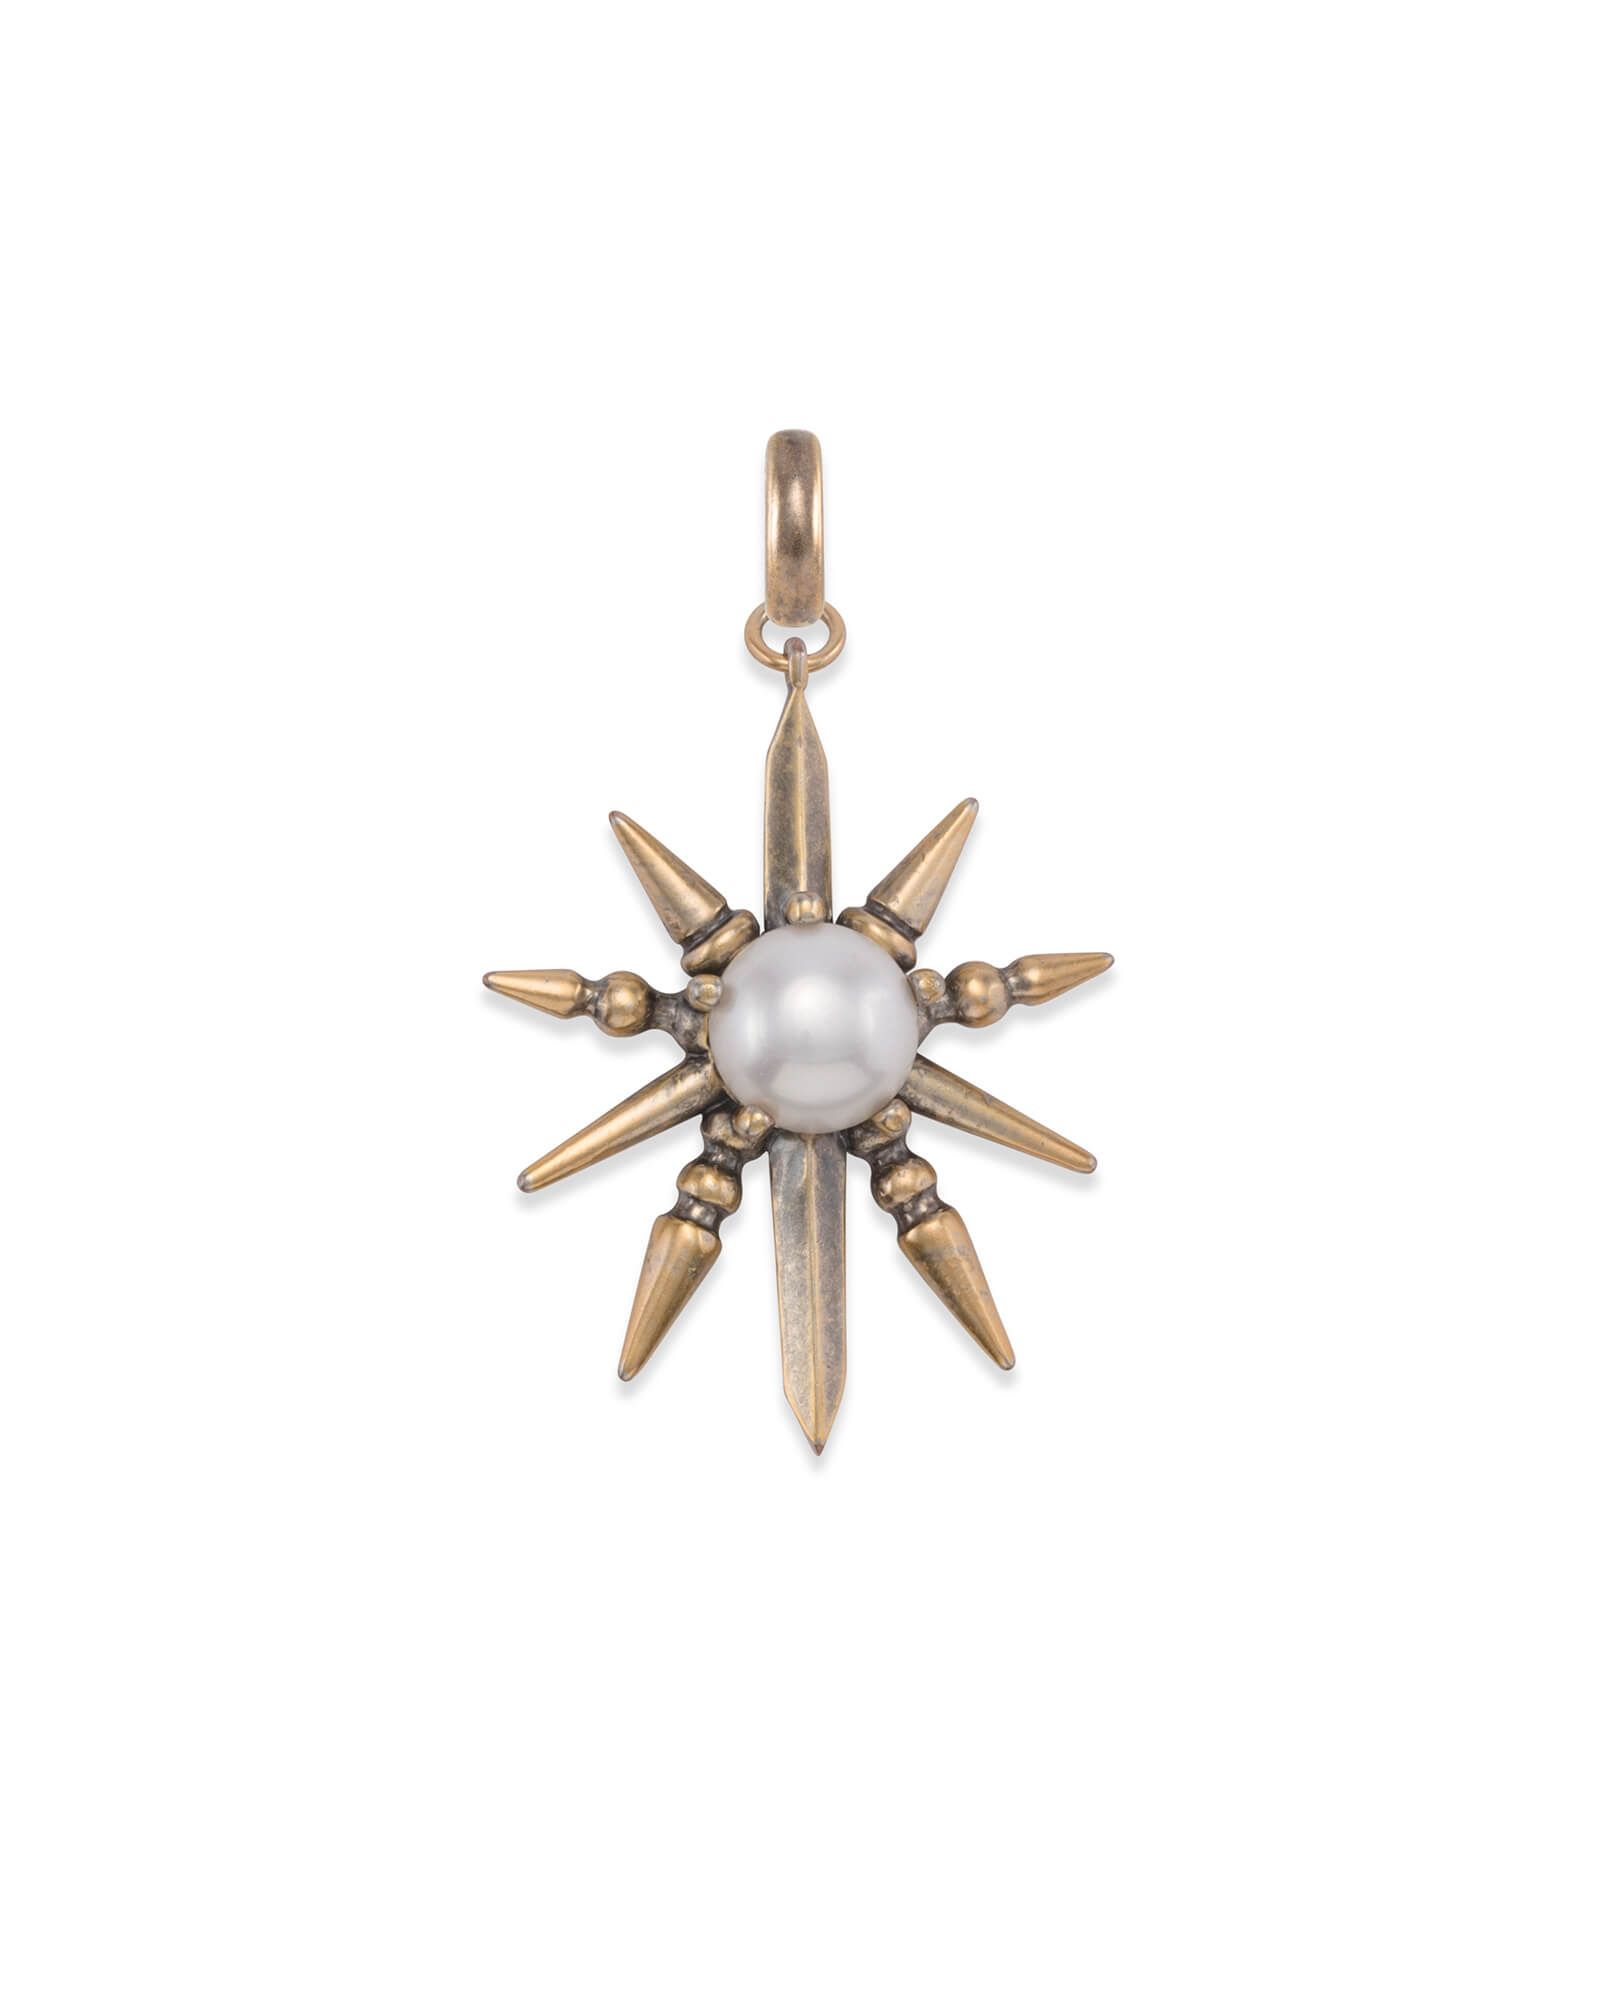 Sunburst with Pearl Charm in Vintage Gold | Kendra Scott